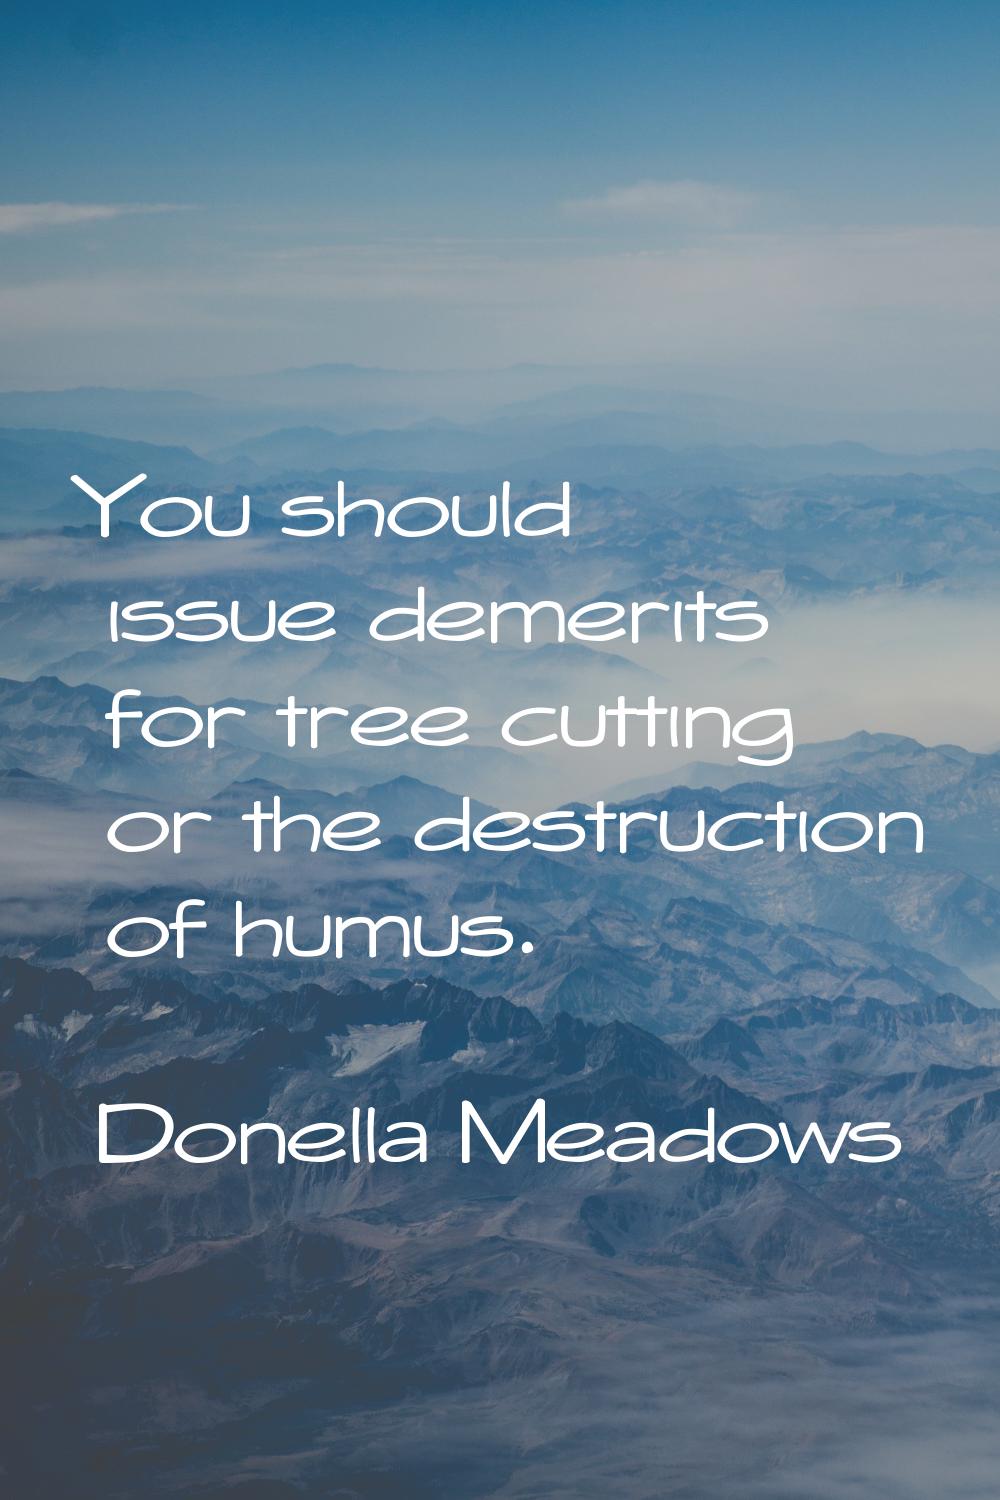 You should issue demerits for tree cutting or the destruction of humus.